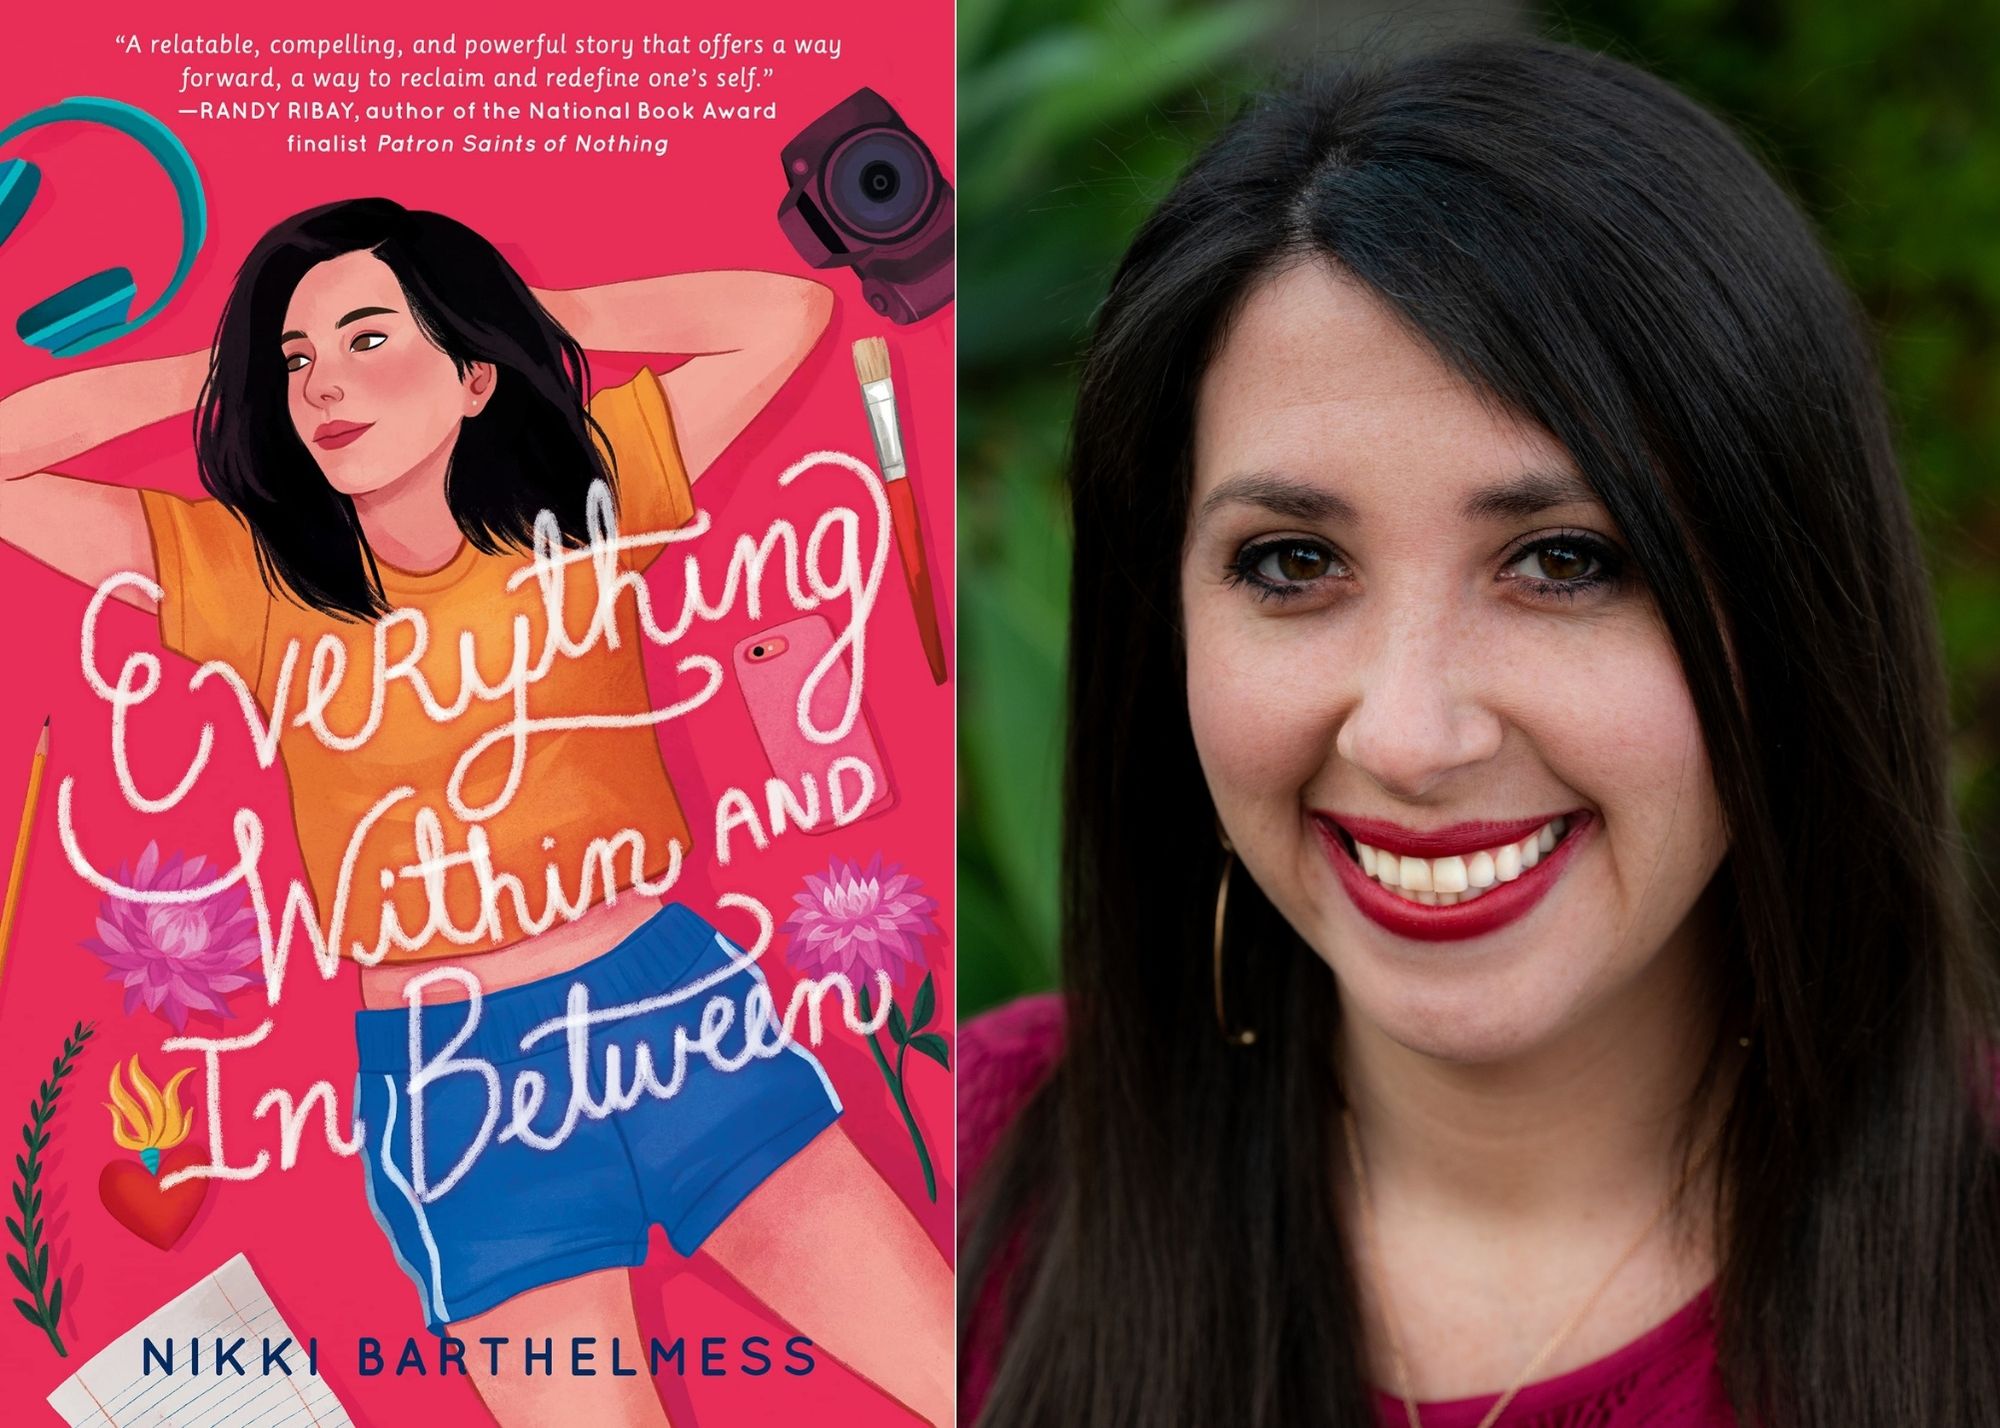 Nikki Barthelmess Talks 'Everything Within And In Between' and Writing as a Form of Healing